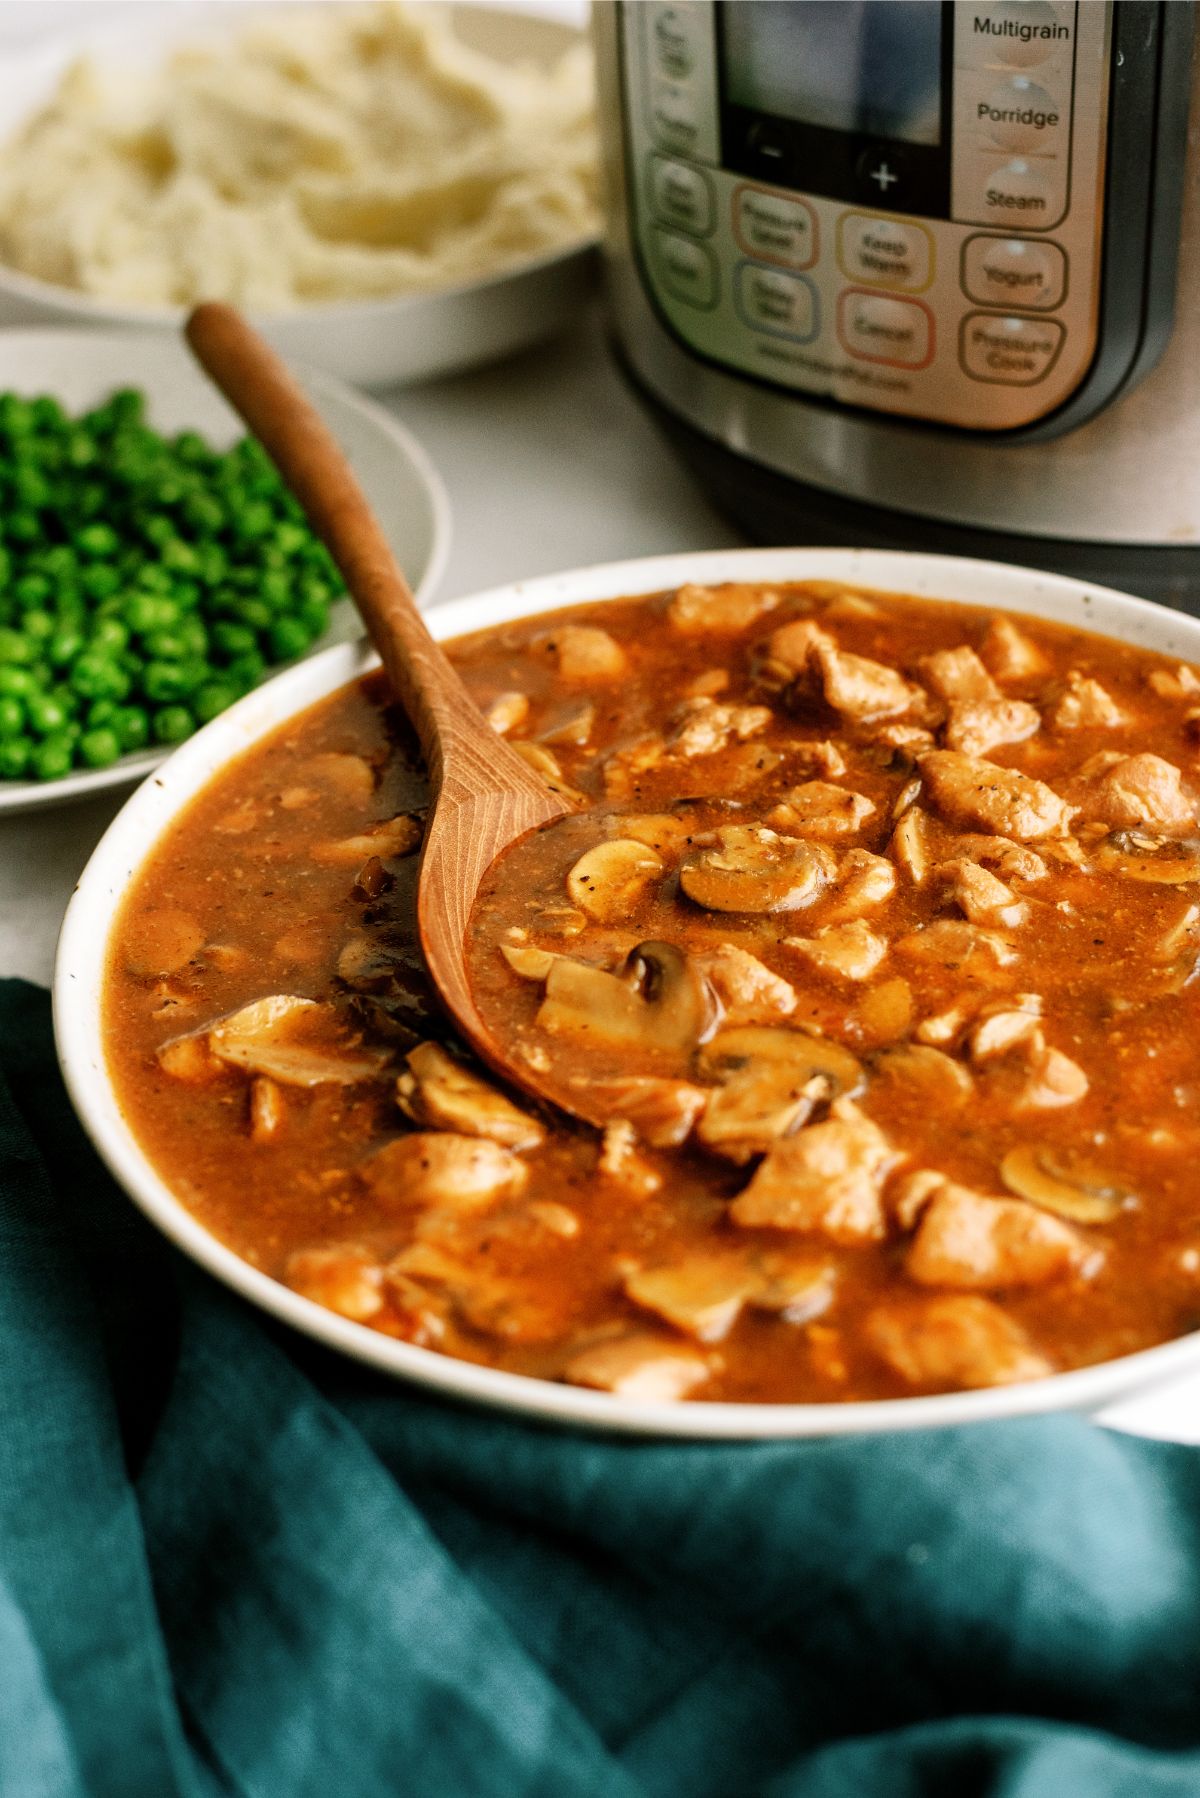 A serving dish full of Instant Pot Pork Tips and Gravy with an Instant Pot in the background and a side of peas